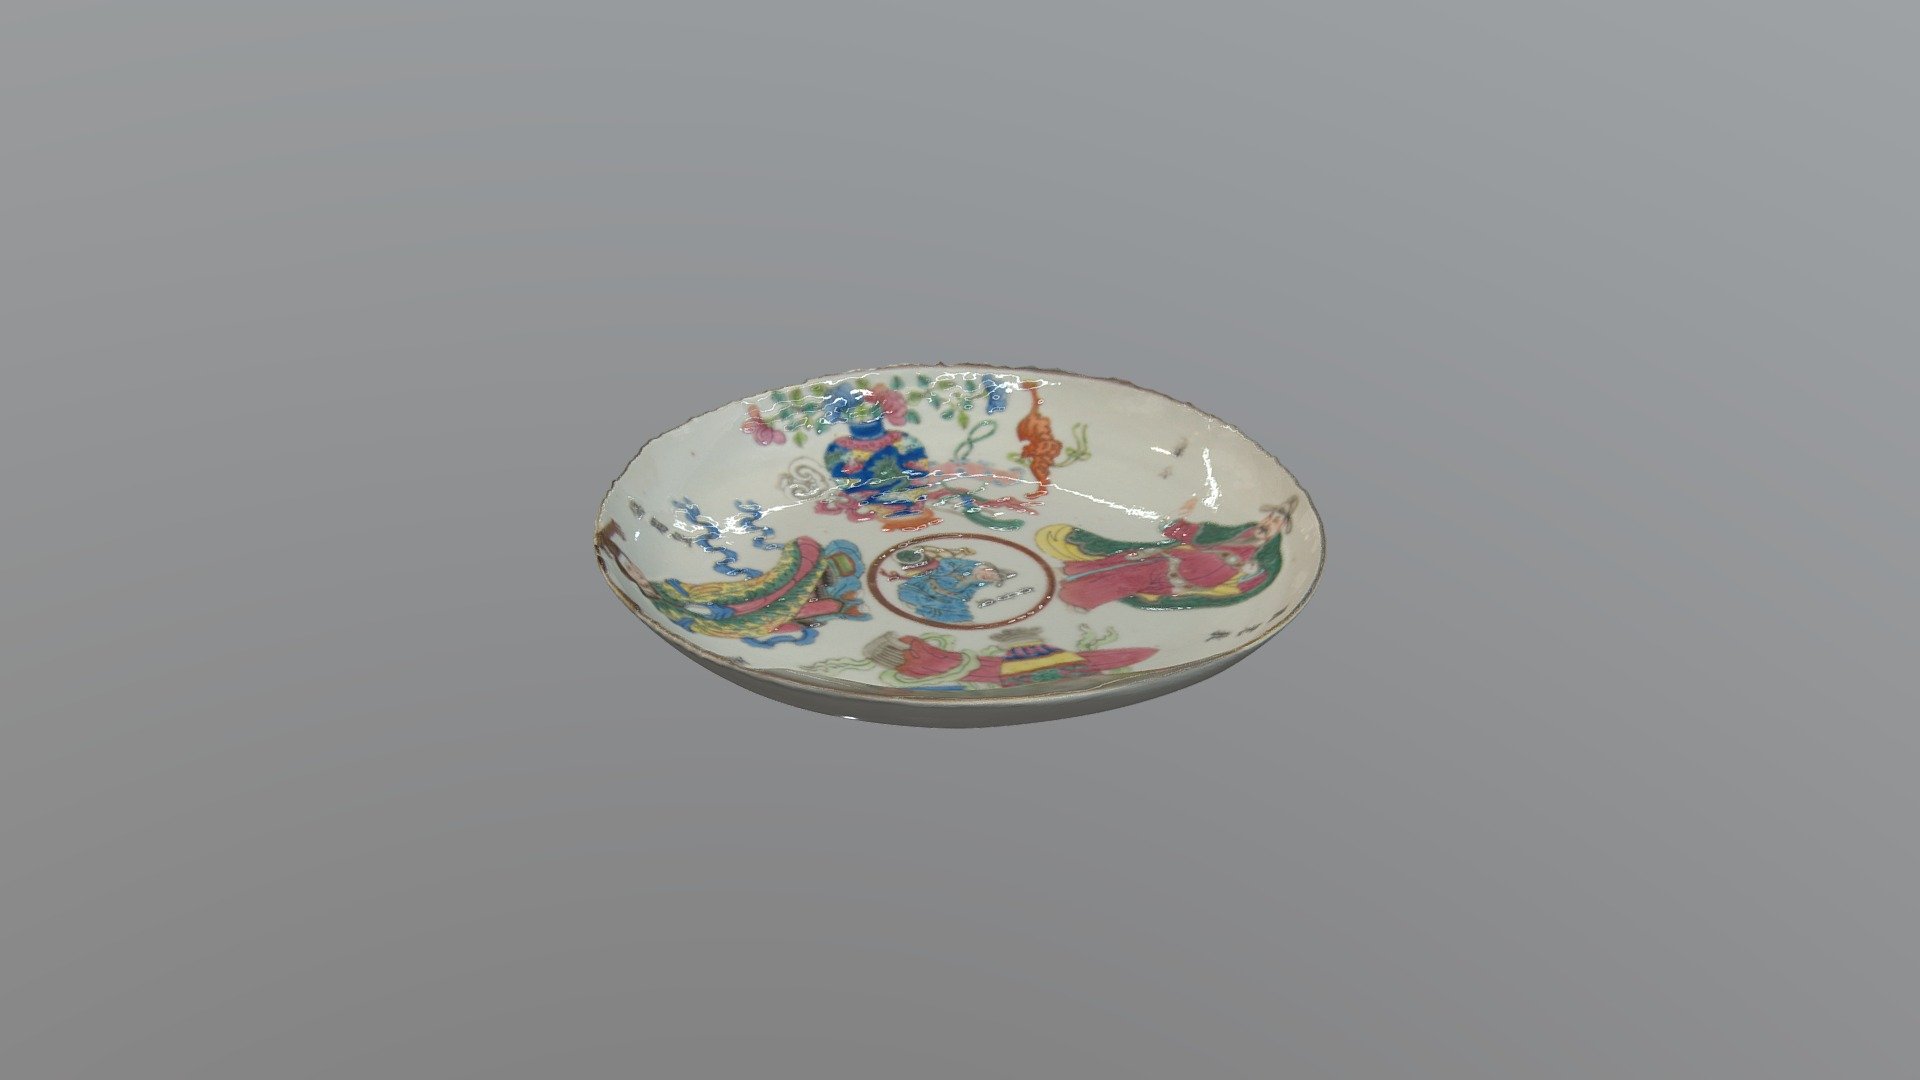 China
plate, Daoguang period (1821–1850), Qing dynasty (1644–1911)
made in China
porcelain
Gift of Swannie Smith Zink, 1962.0016.05 - plate - 3D model by Spencer Museum of Art (@SpencerMuseumofArt) 3d model